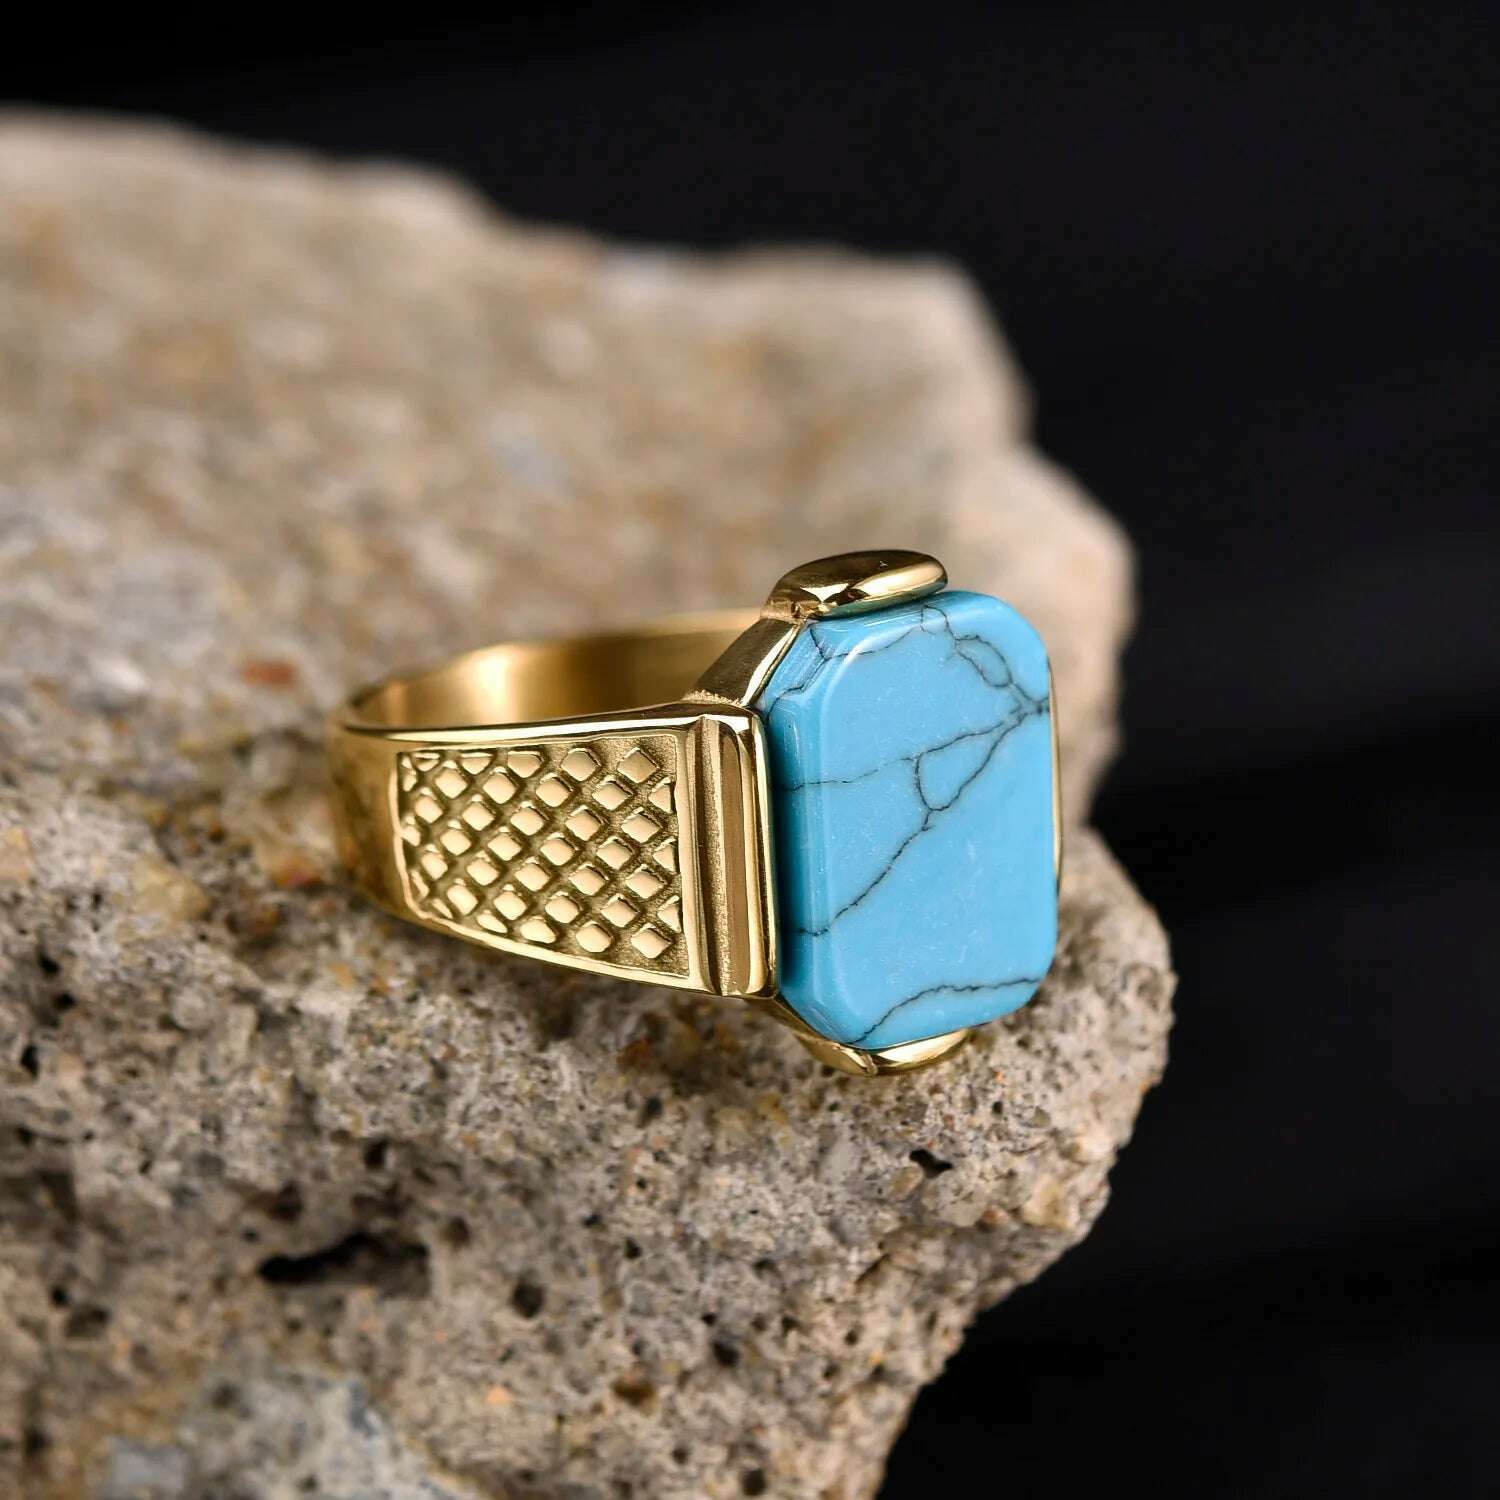 Men's High Quality Vintage Stainless Steel Gemstone Styles 18K Gold Plated Ring Jewelry Professional Factory Made, Turquoise / 8, KIMLUD Women's Clothes